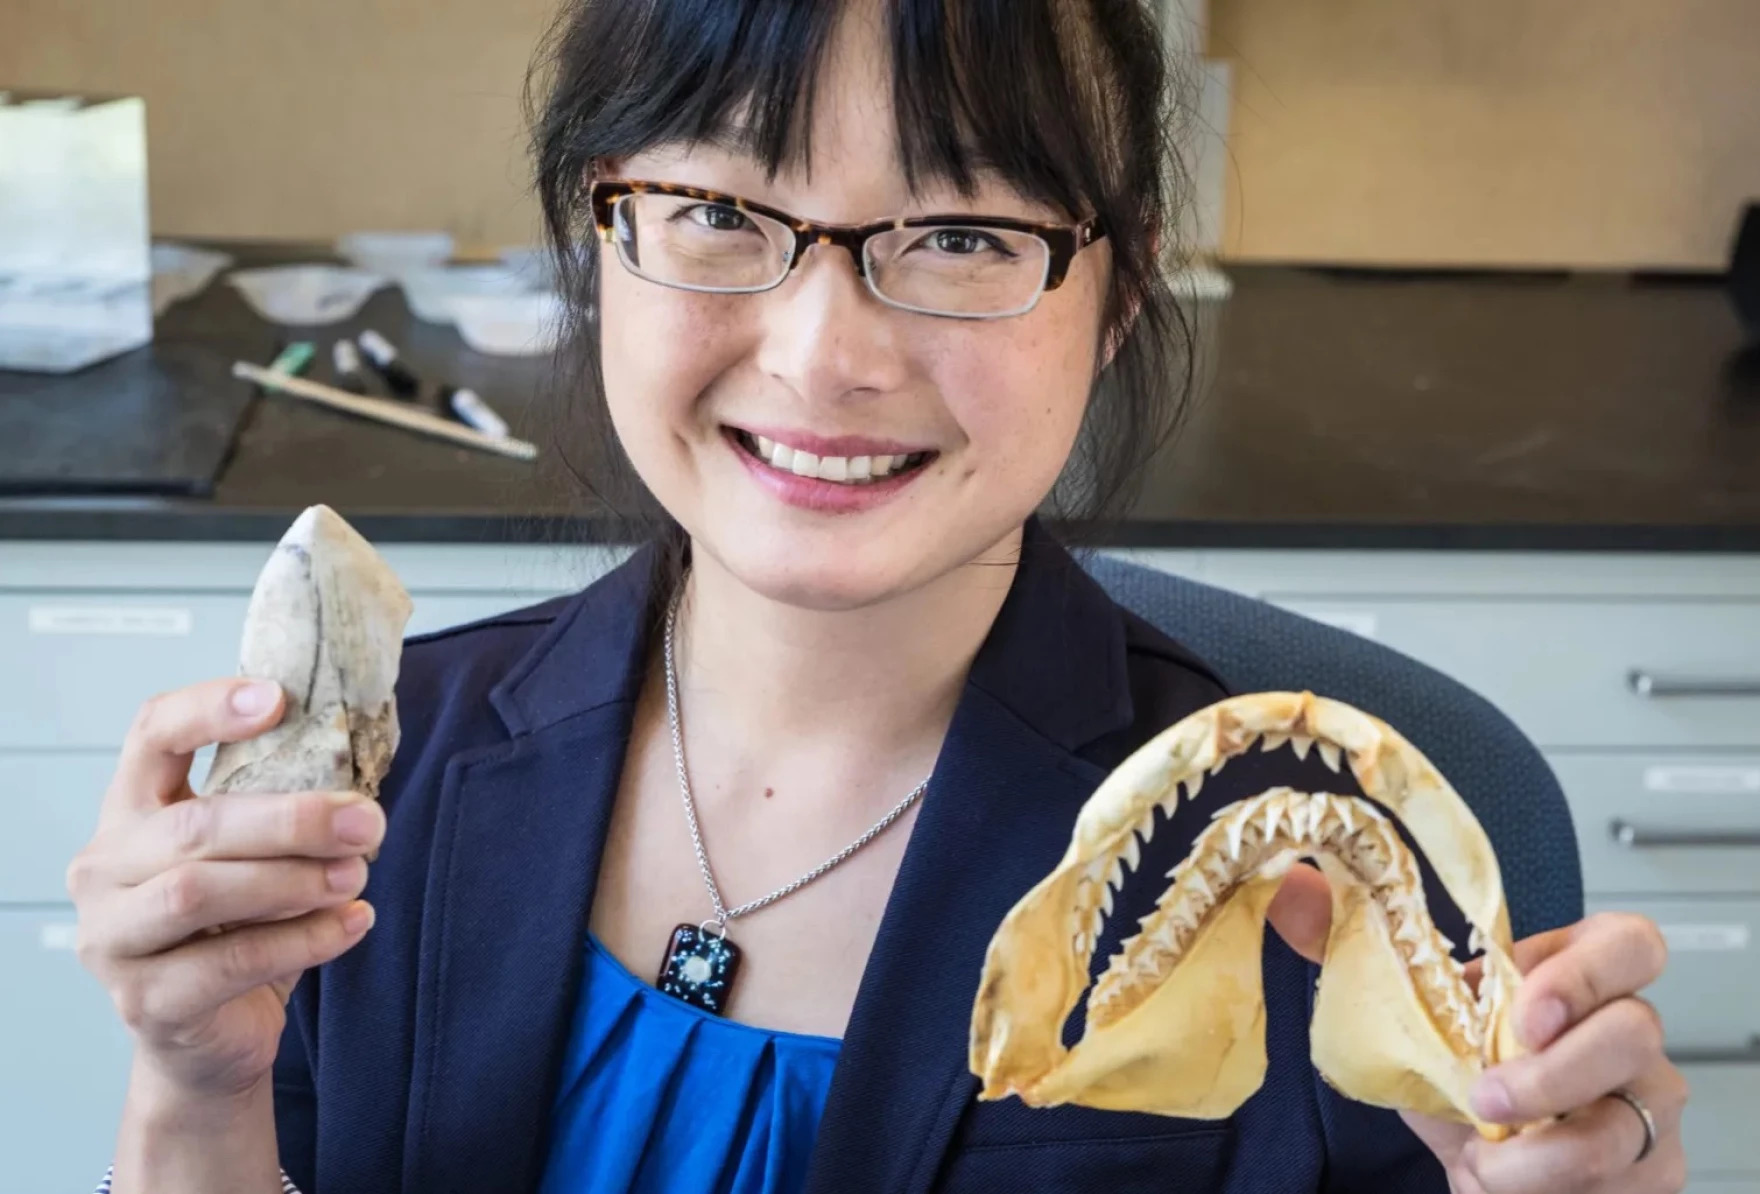 Smiling woman with glasses holds up shark teeth and jaw